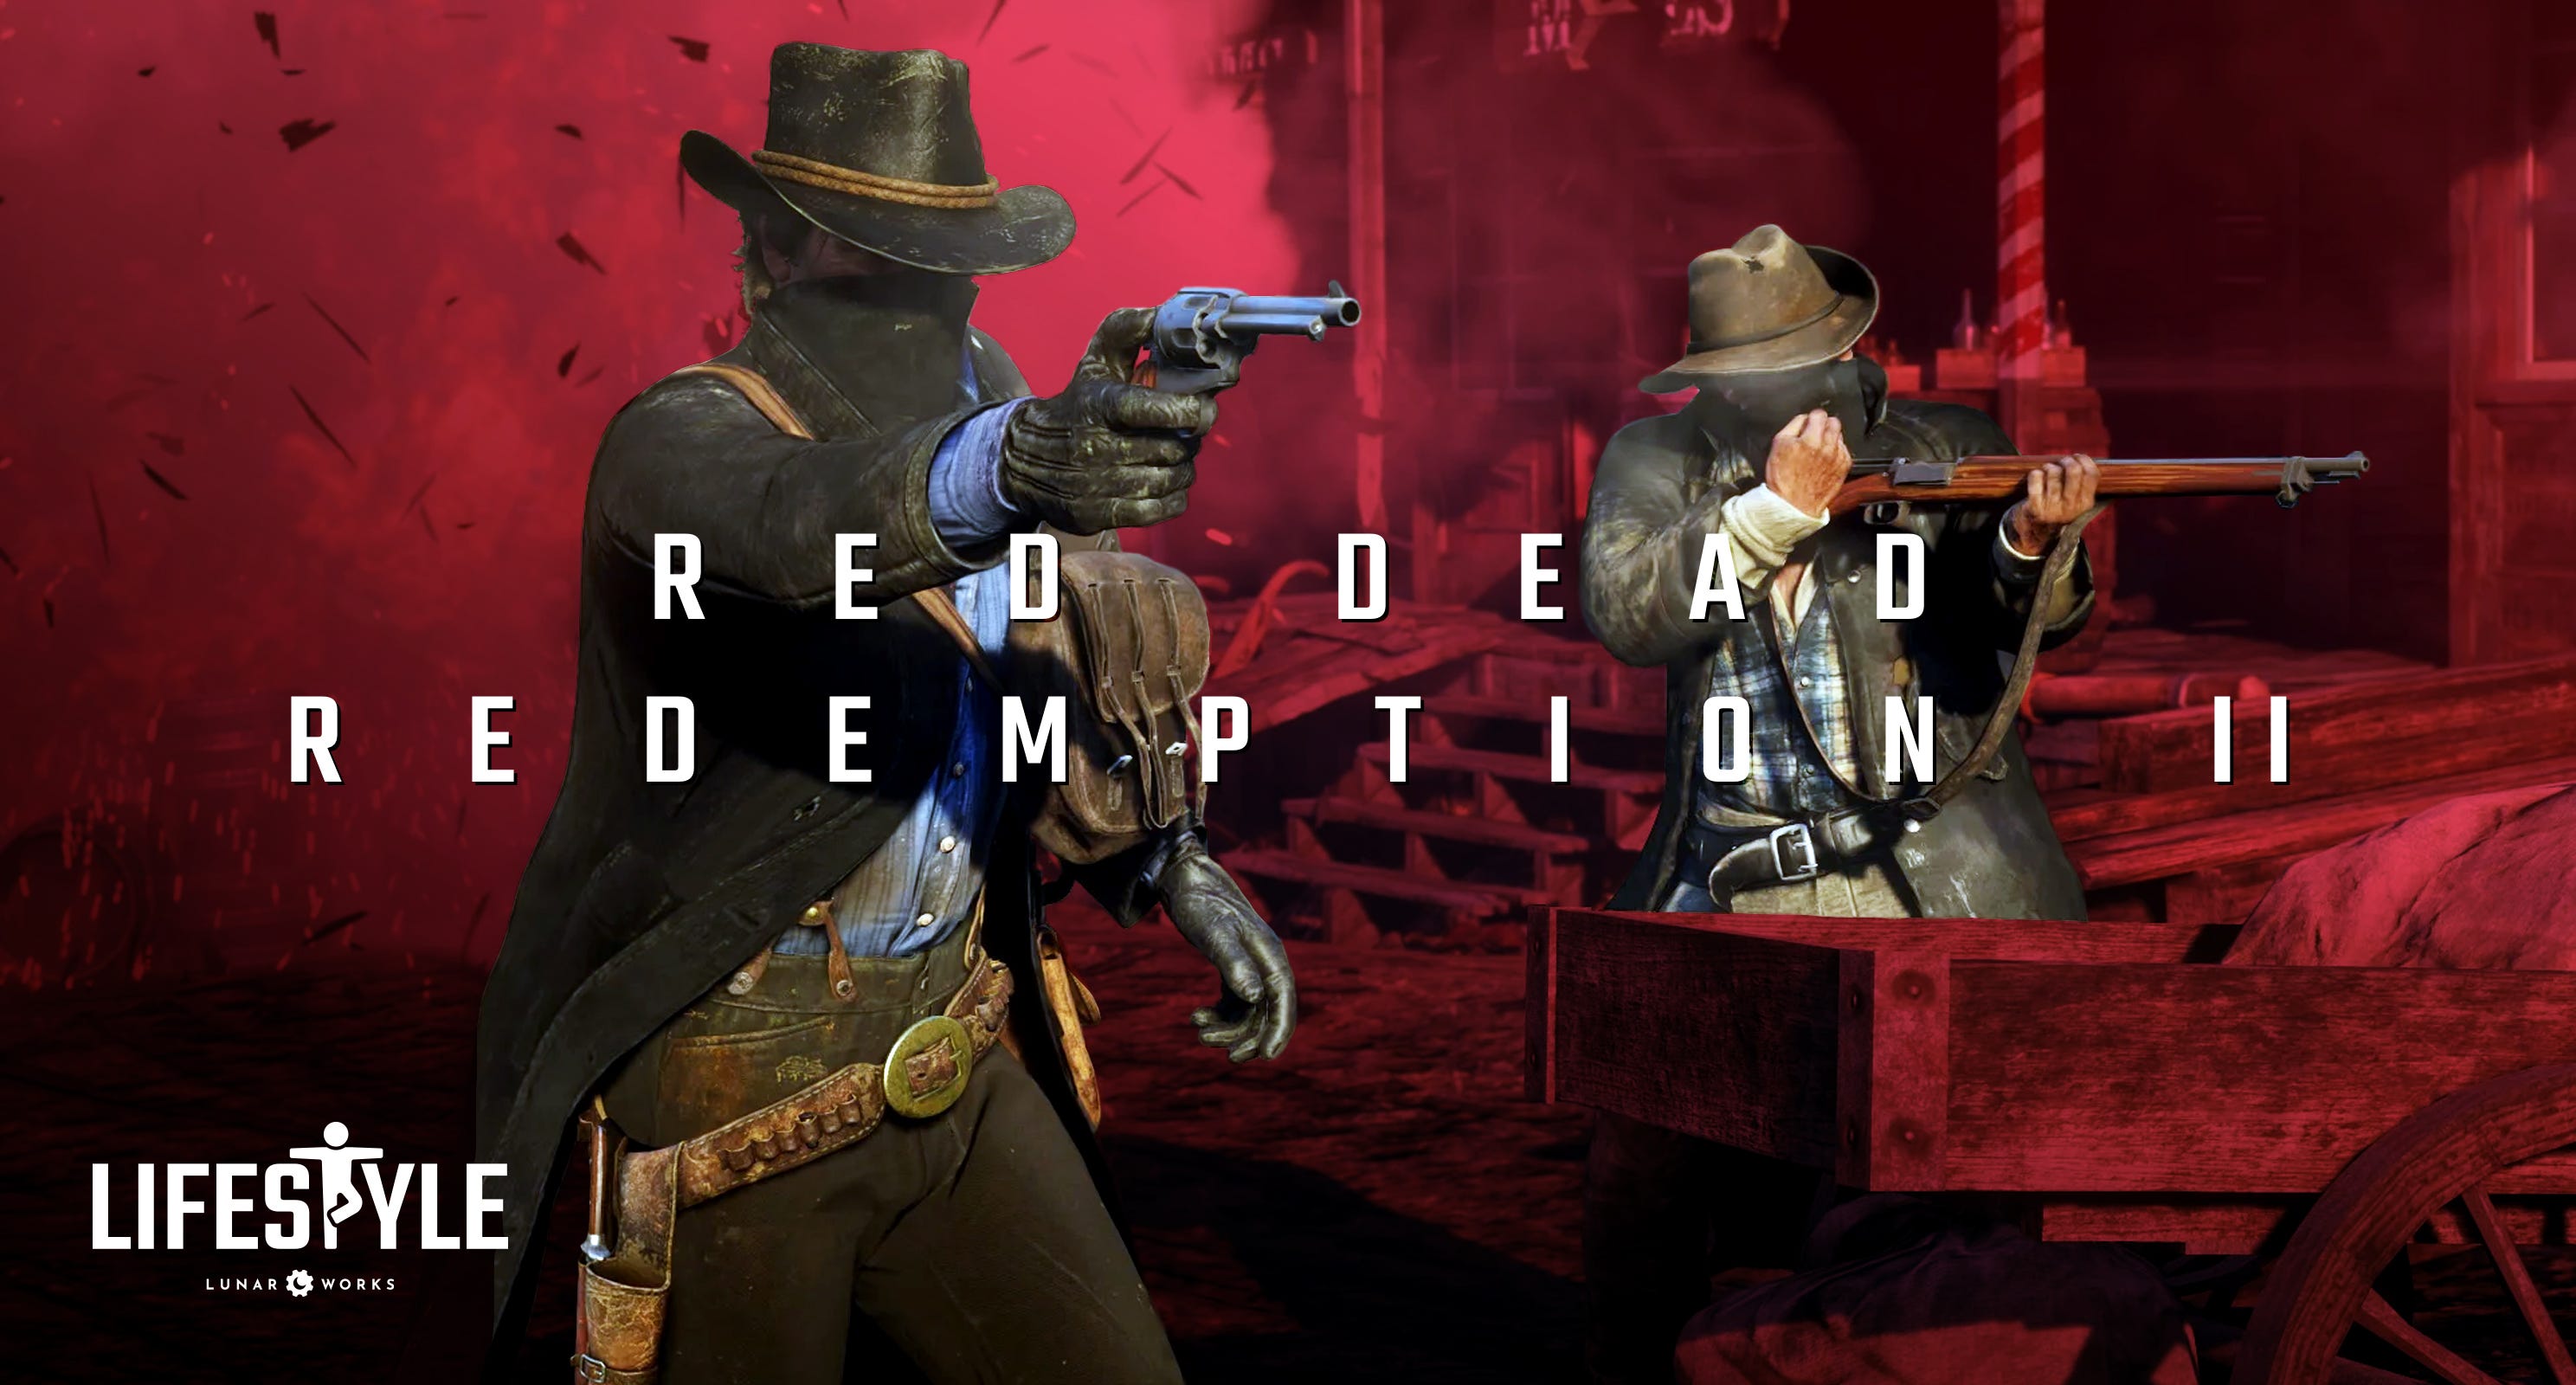 Red Dead Redemption Ii S Design The Good The Bad And The Ugly